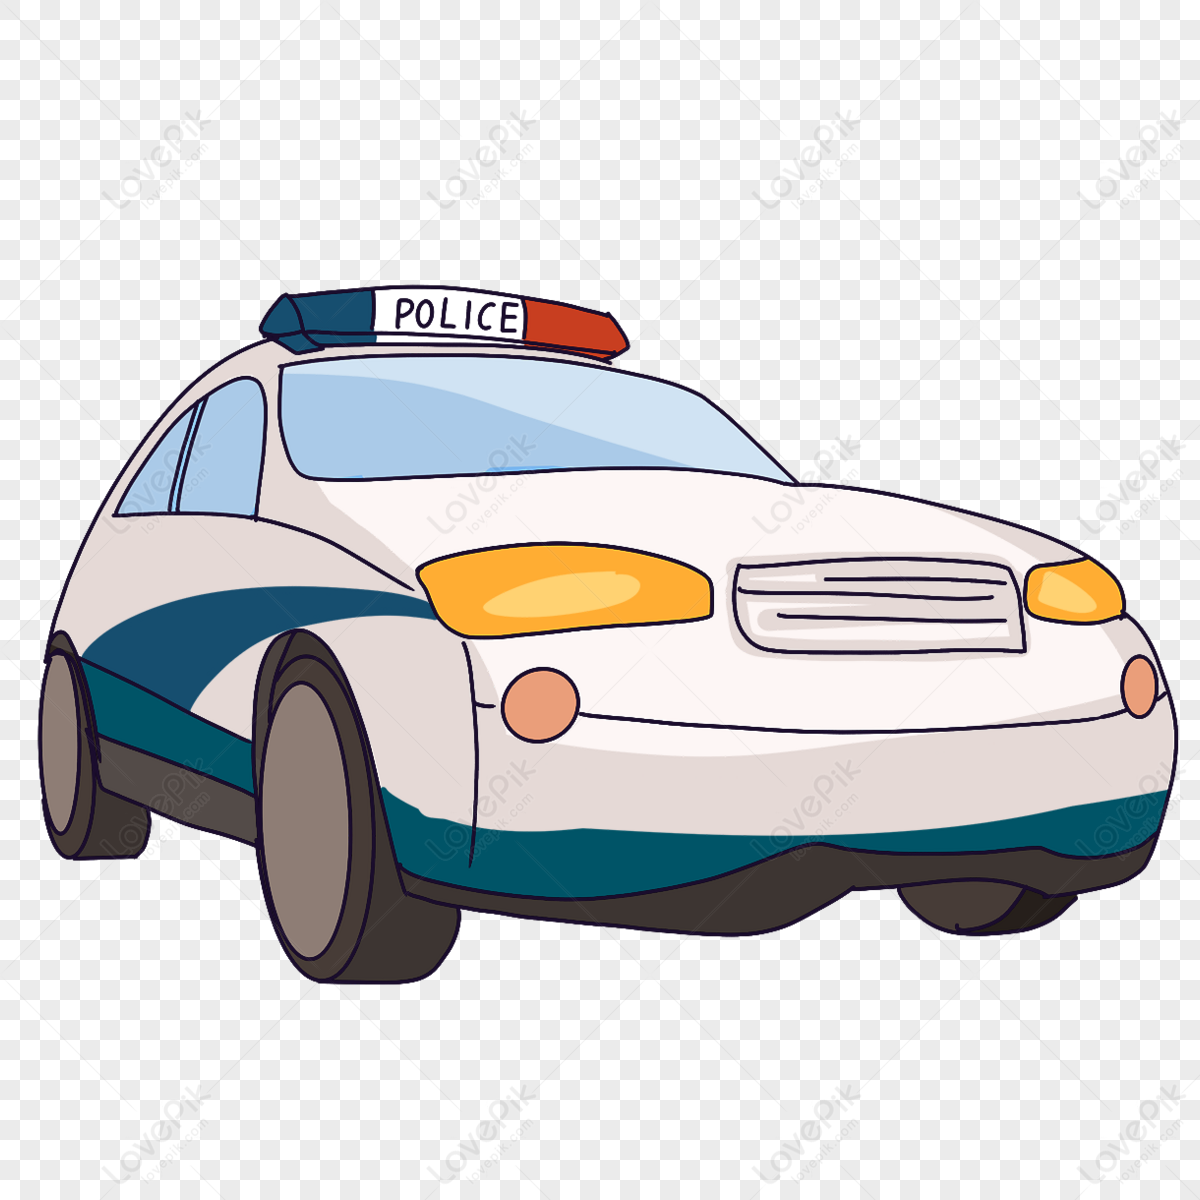 How to Draw a Police Car - Easy Drawing Tutorial For Kids | Drawing  tutorial easy, Easy drawings for kids, Drawing tutorials for kids